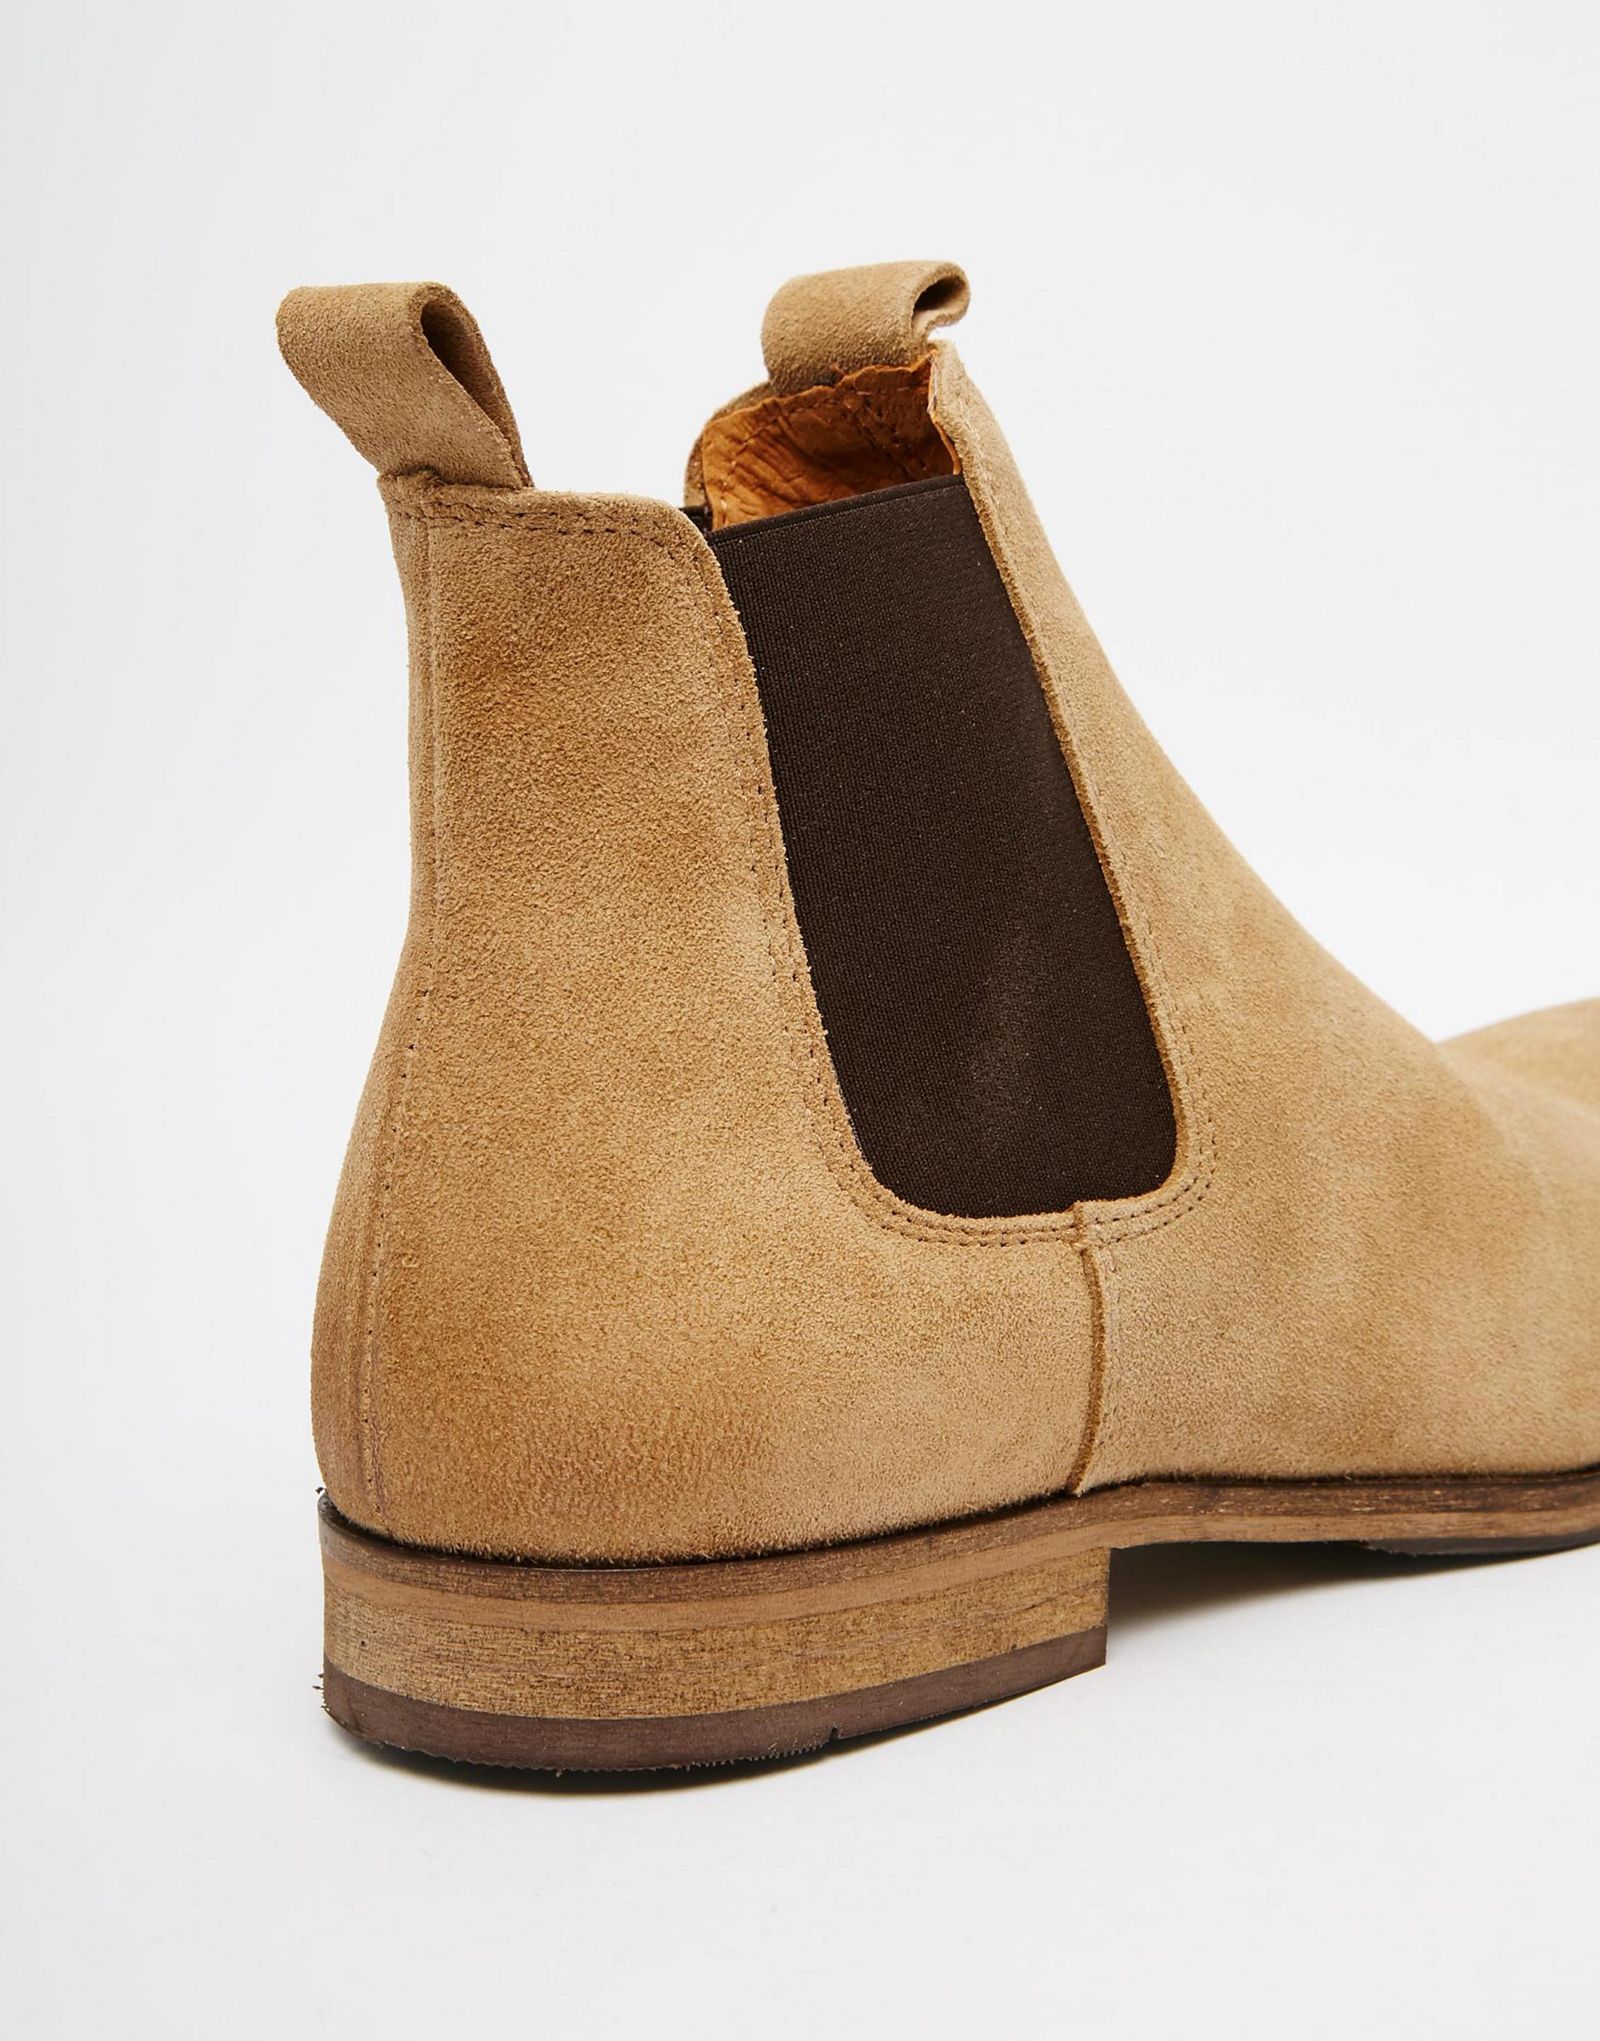 Selected Homme Melvin Suede Chelsea Boots